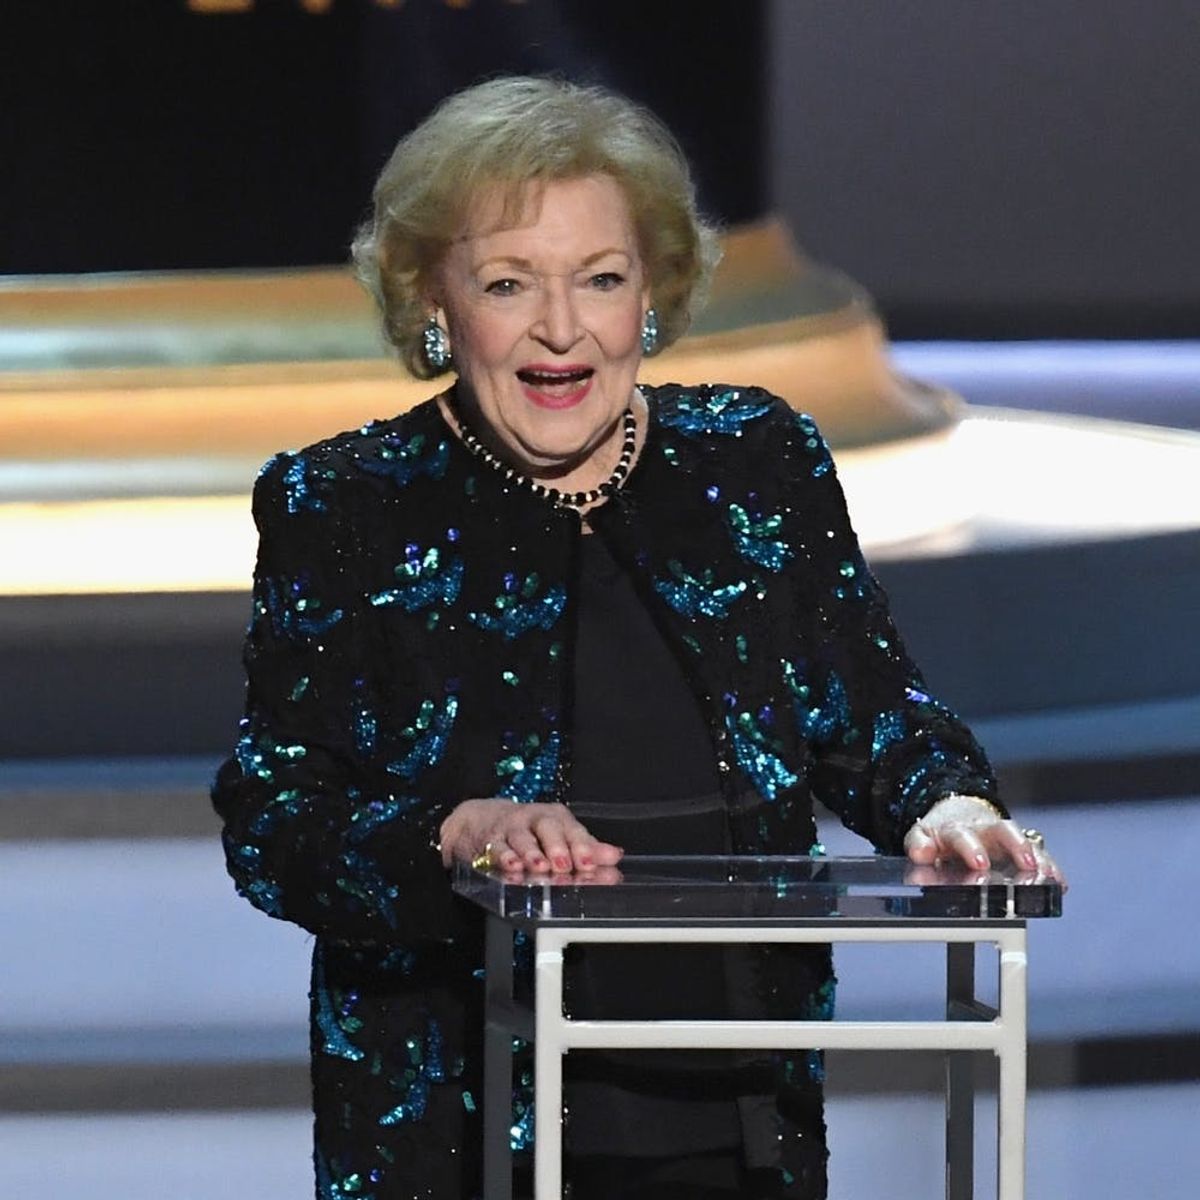 Emmys 2018: Betty White Steals the Show as the ‘First Lady of Television’